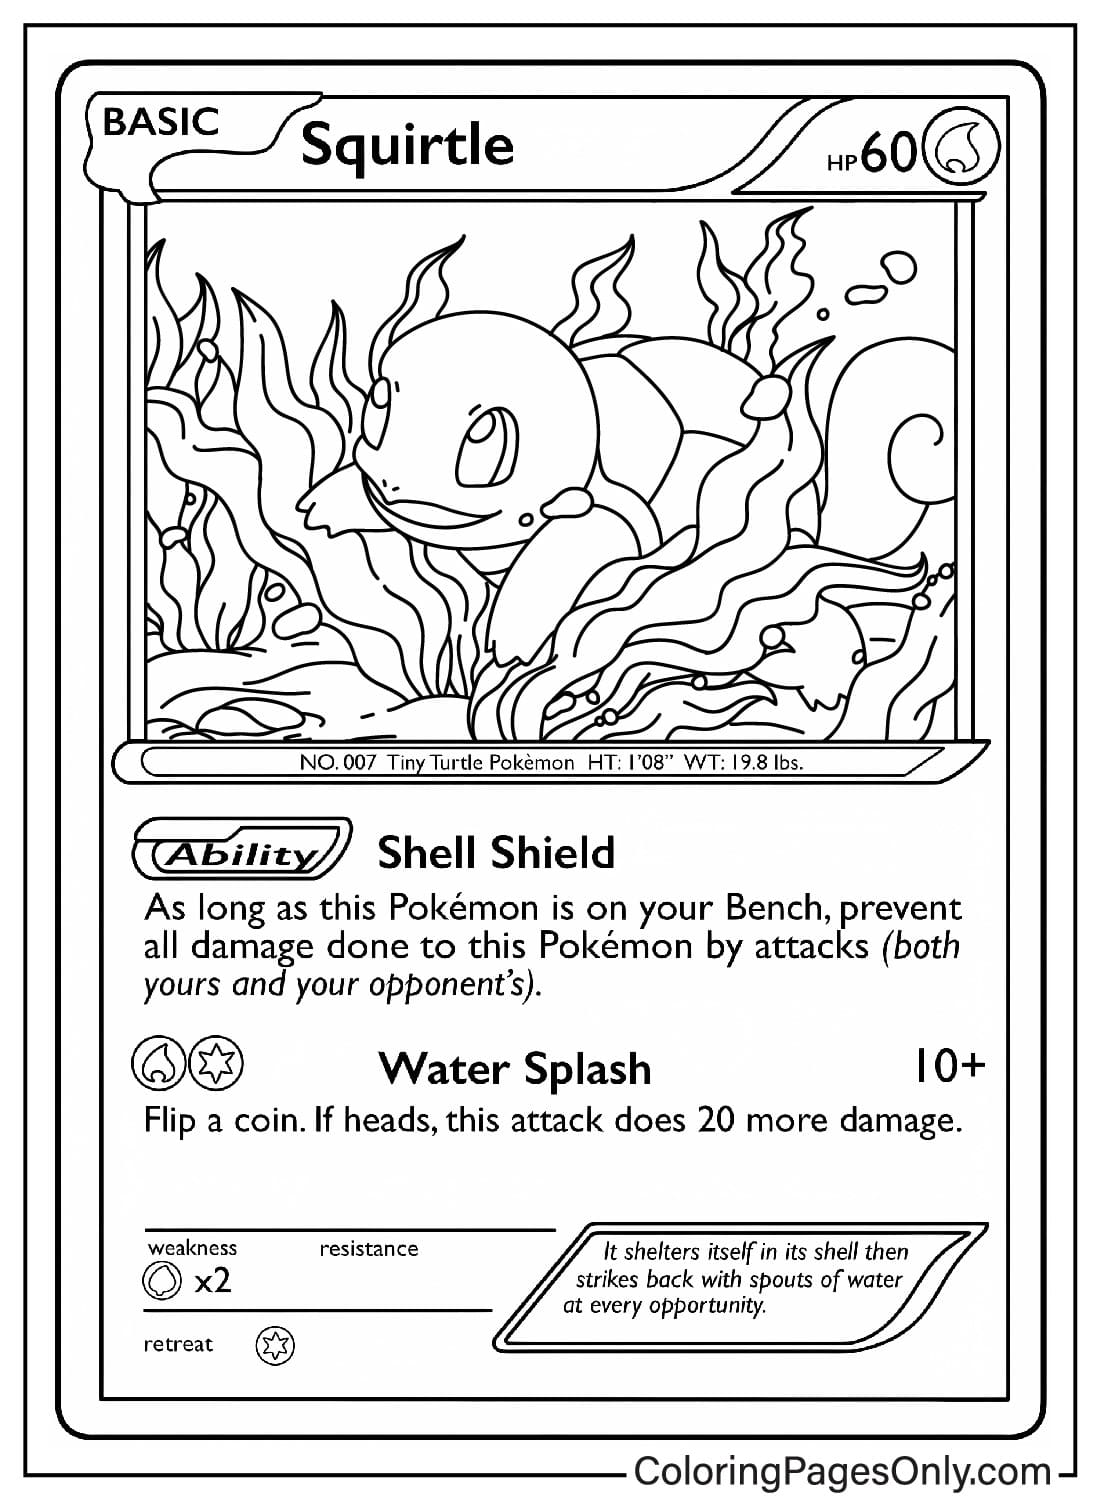 Squirtle Pokemon Card Coloring Page from Pokemon Card